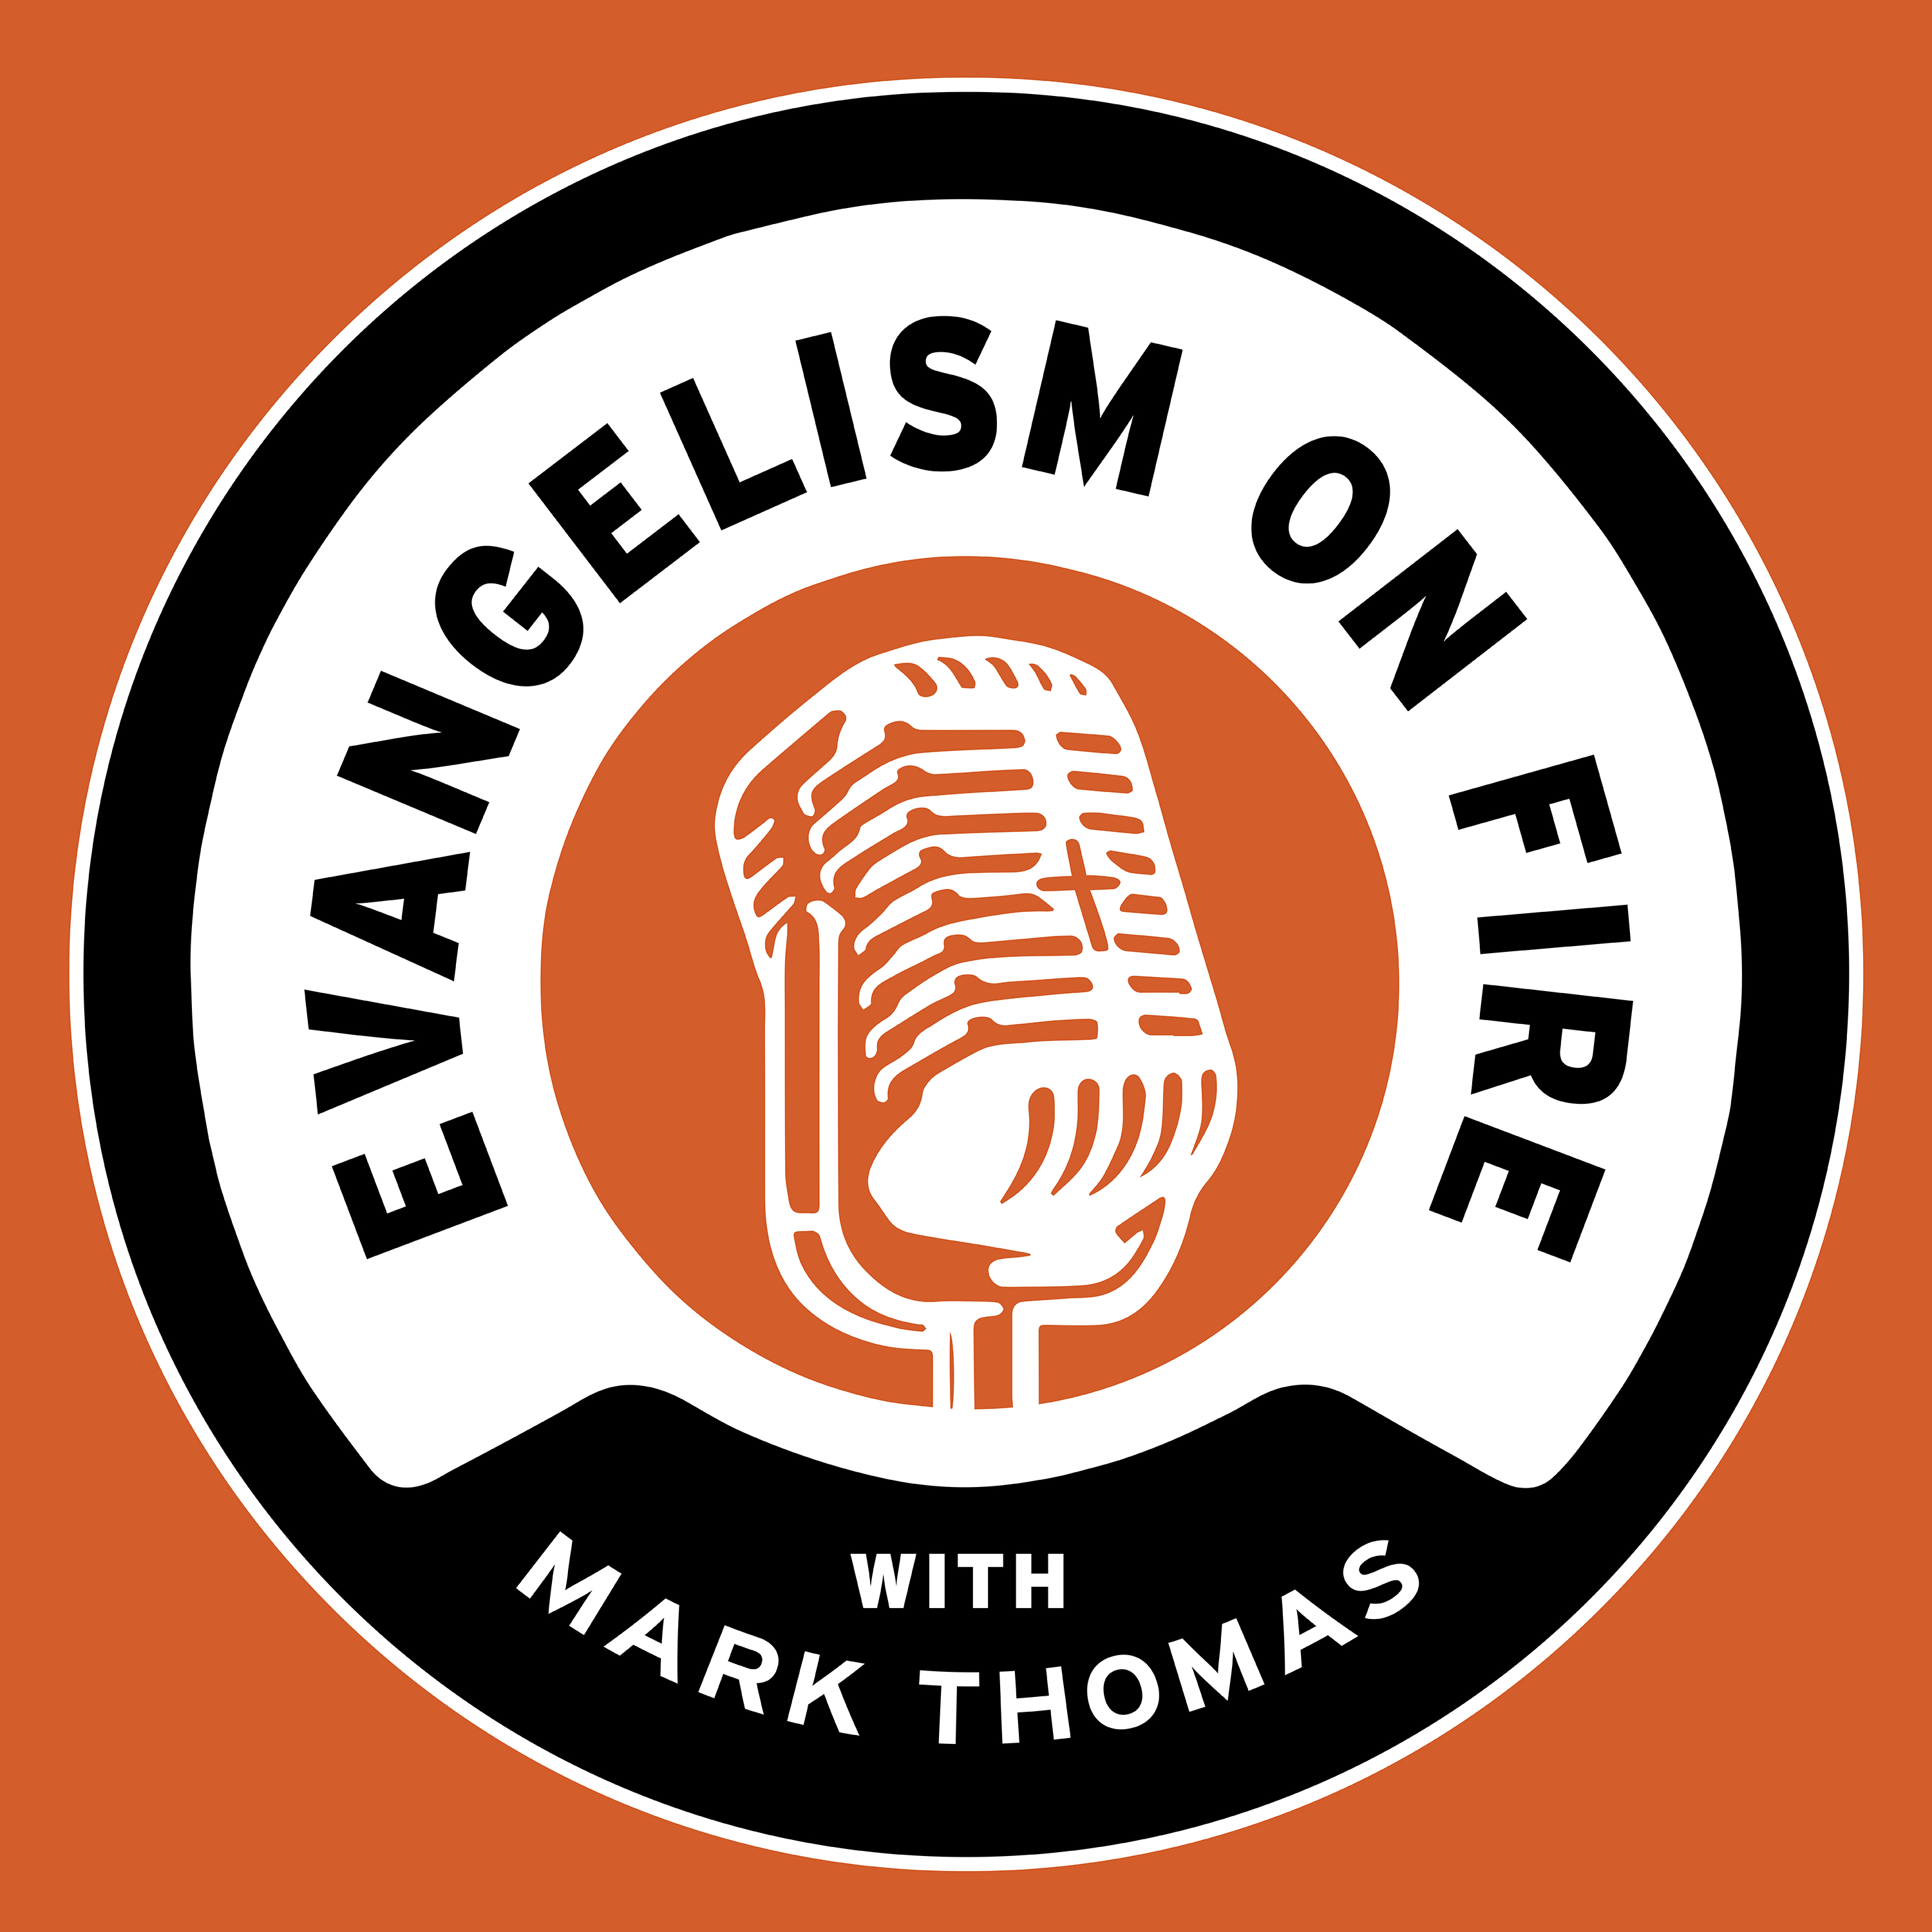 A highlight from Mark Thomas Shares 3 Recent God Stories